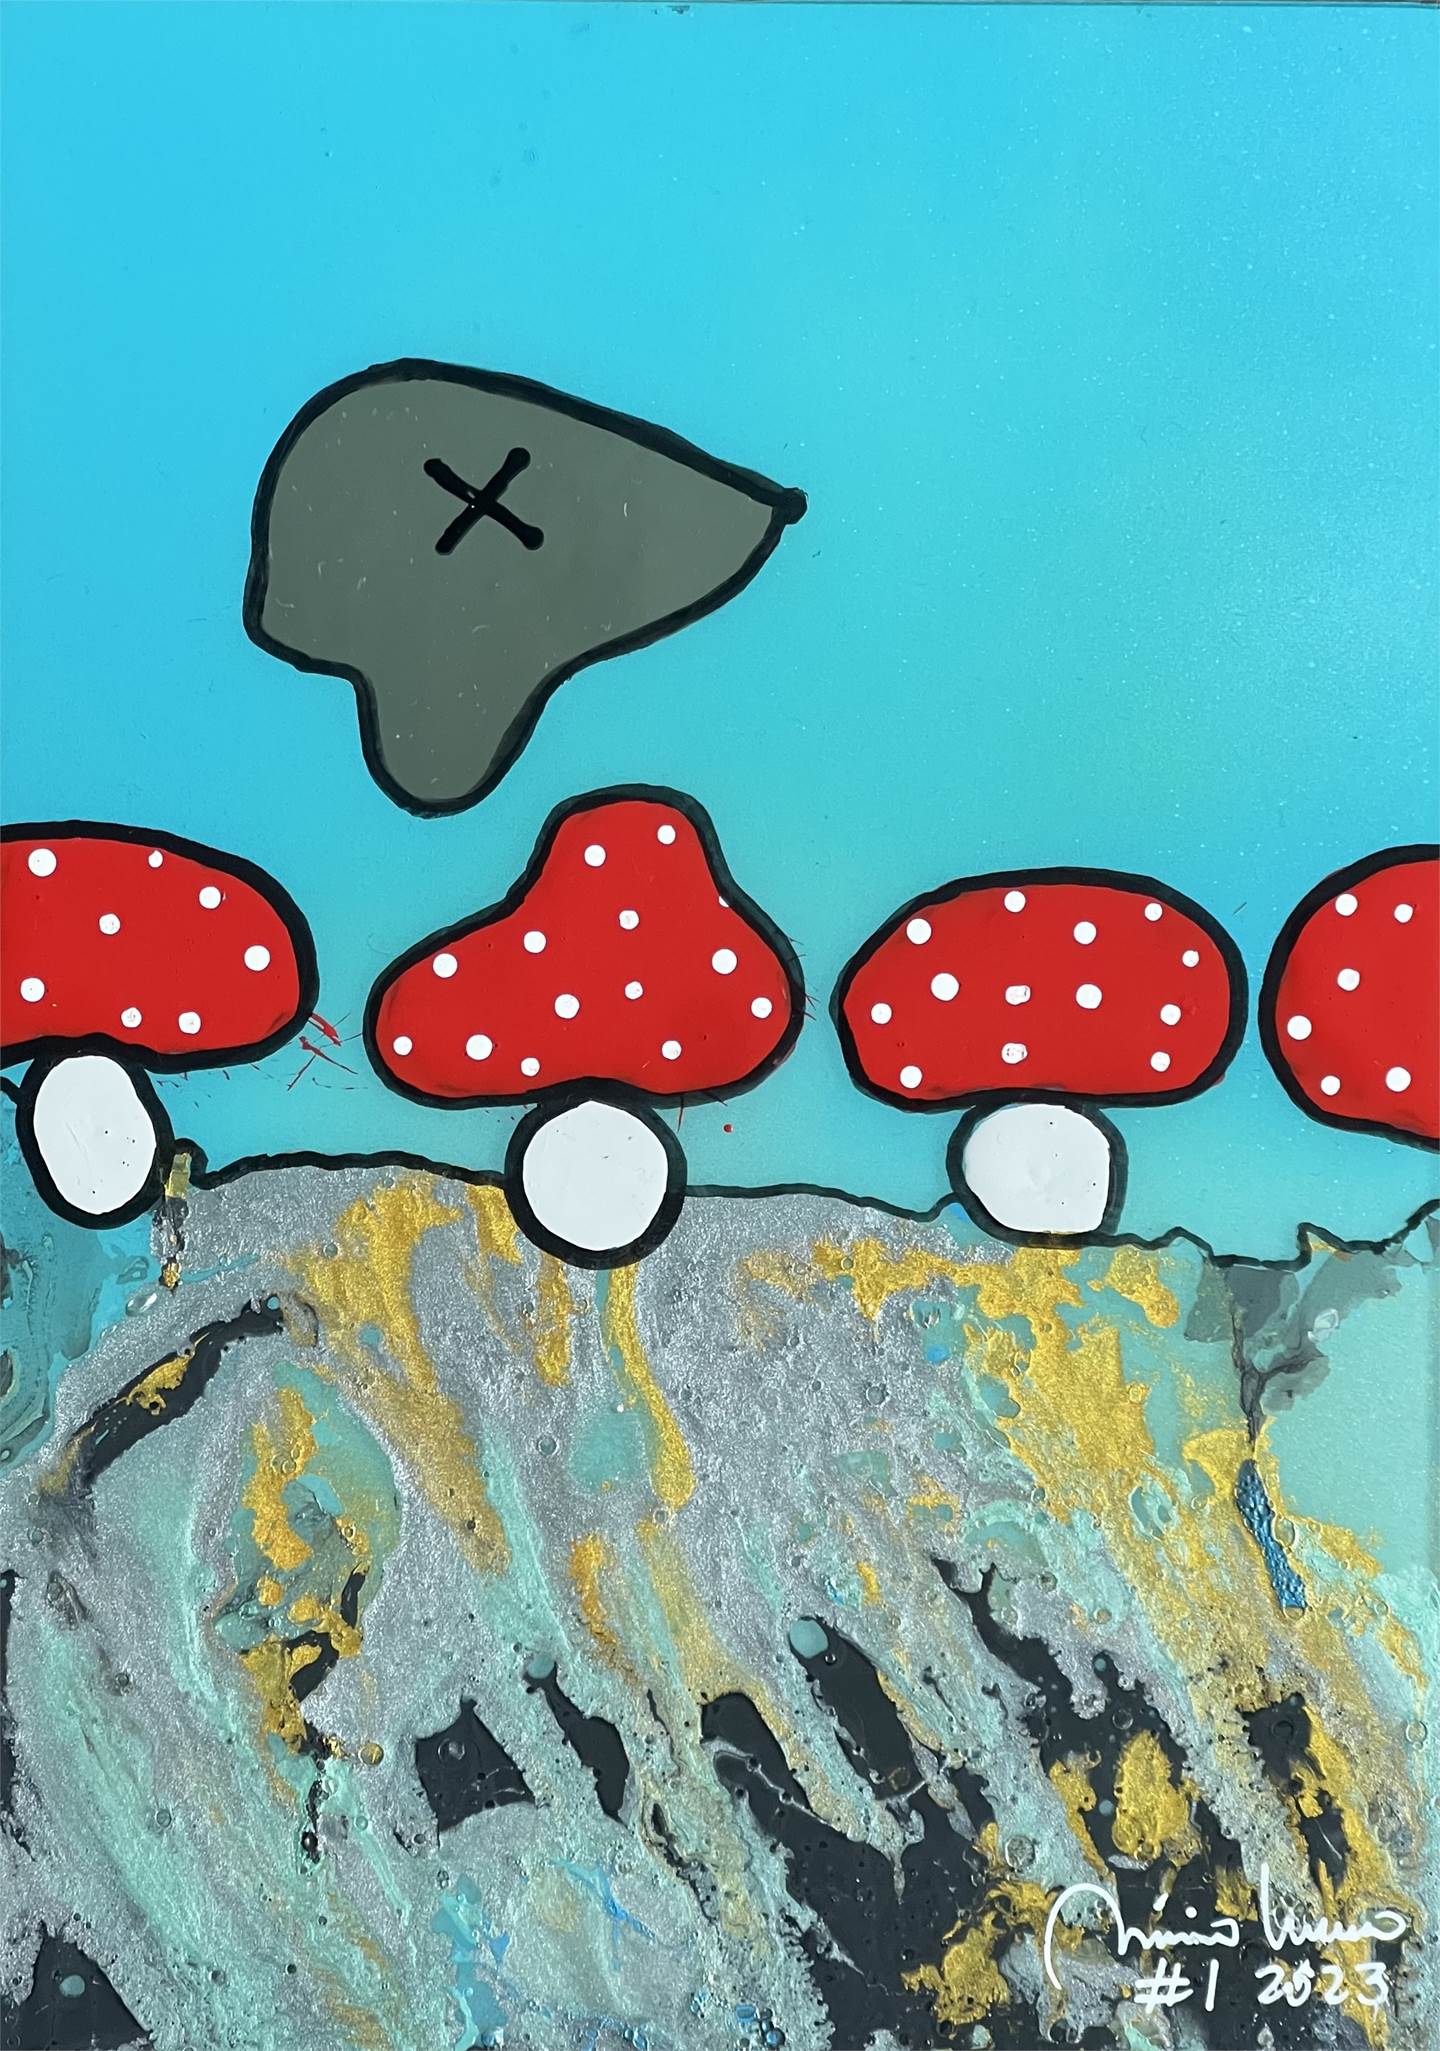 The mushrooms and the cloud #1, original   Painting by Mario Louro